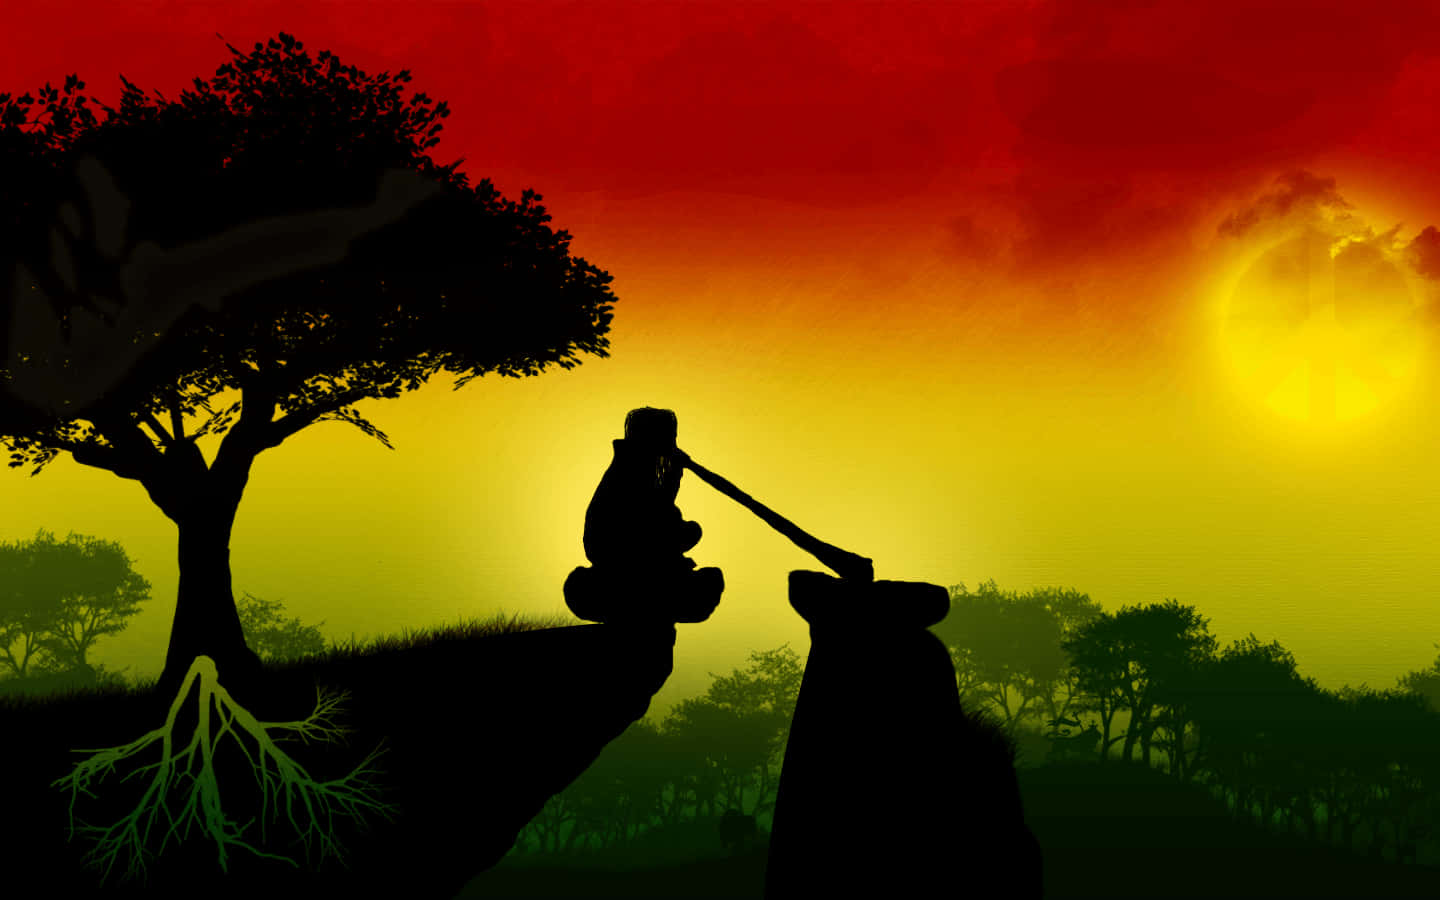 Showing the beauty and life of Rastafarian culture Wallpaper